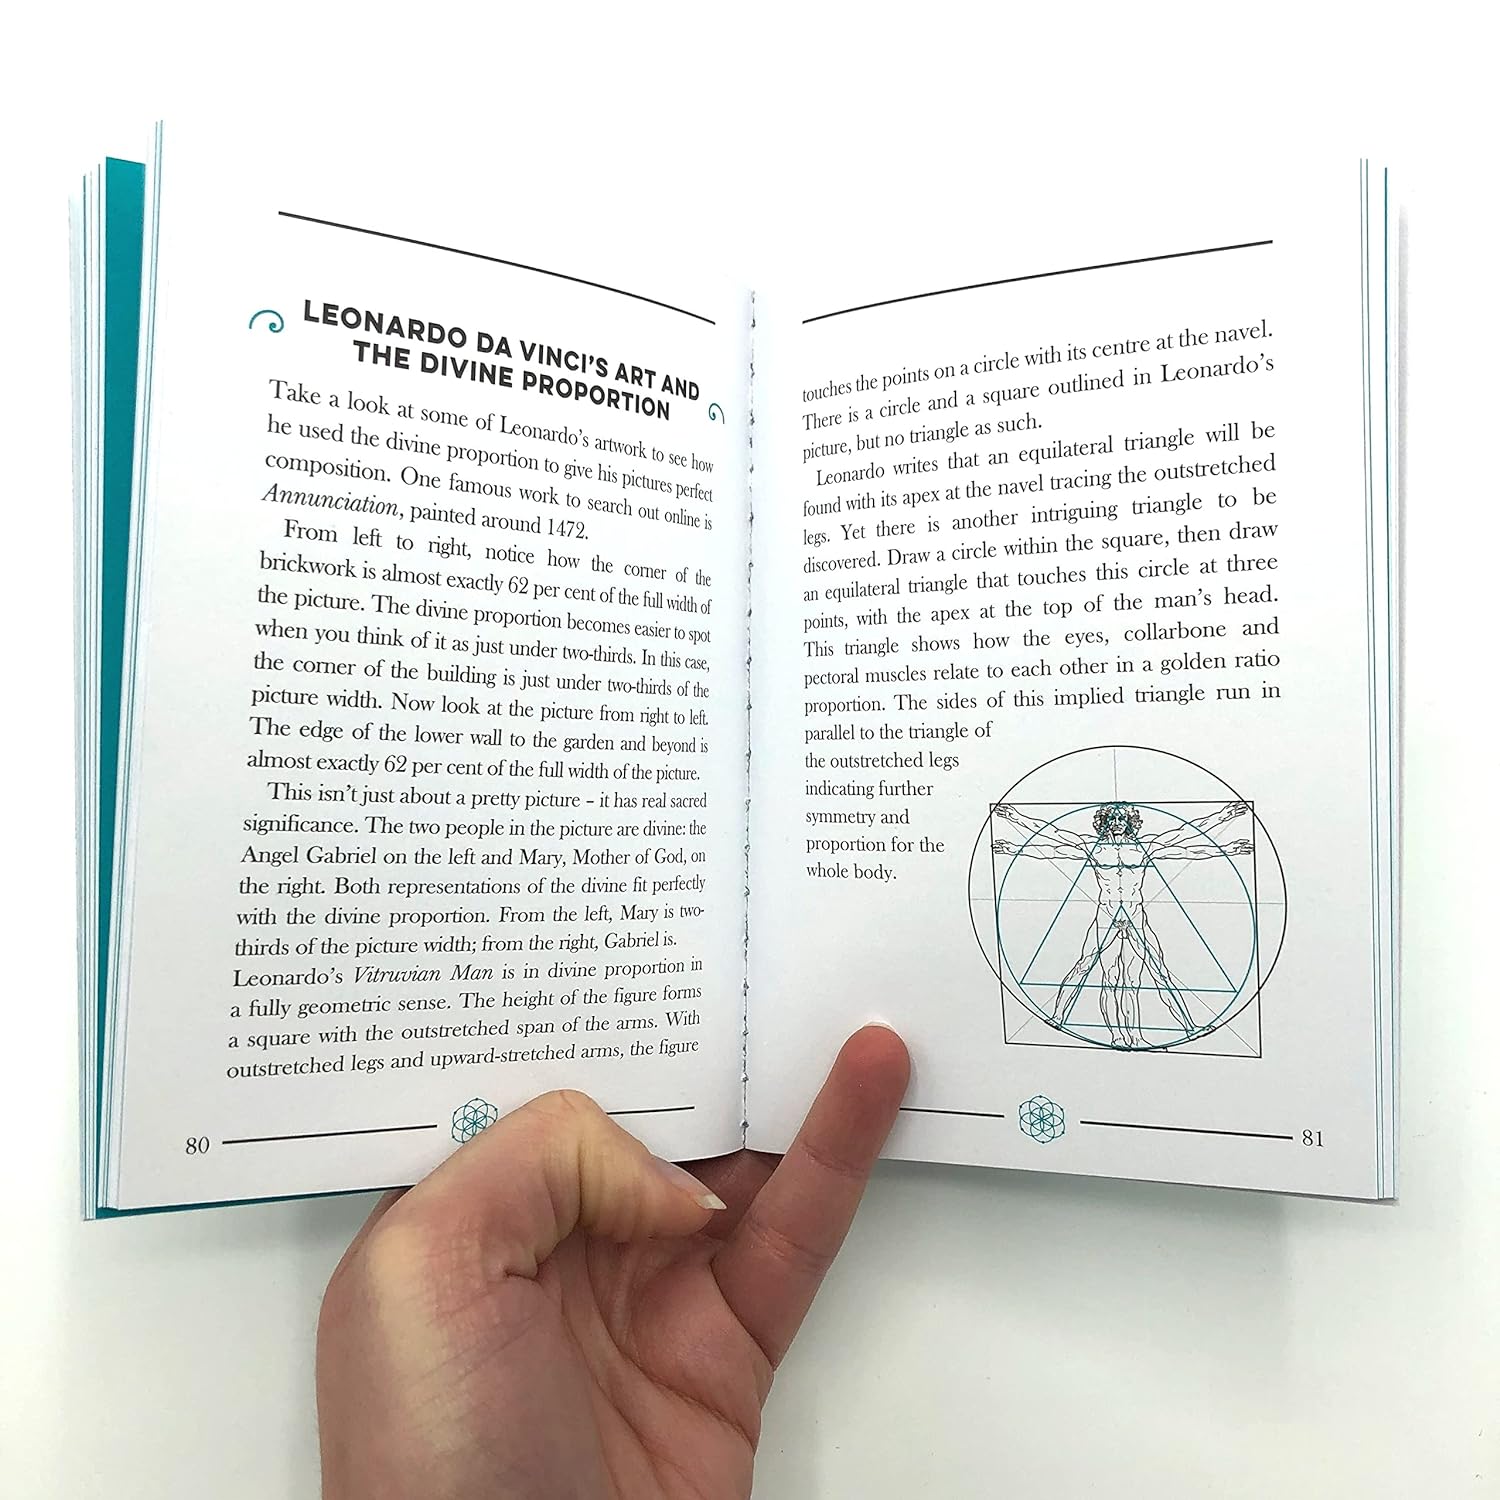 The Little Book Of Sacred Geometry